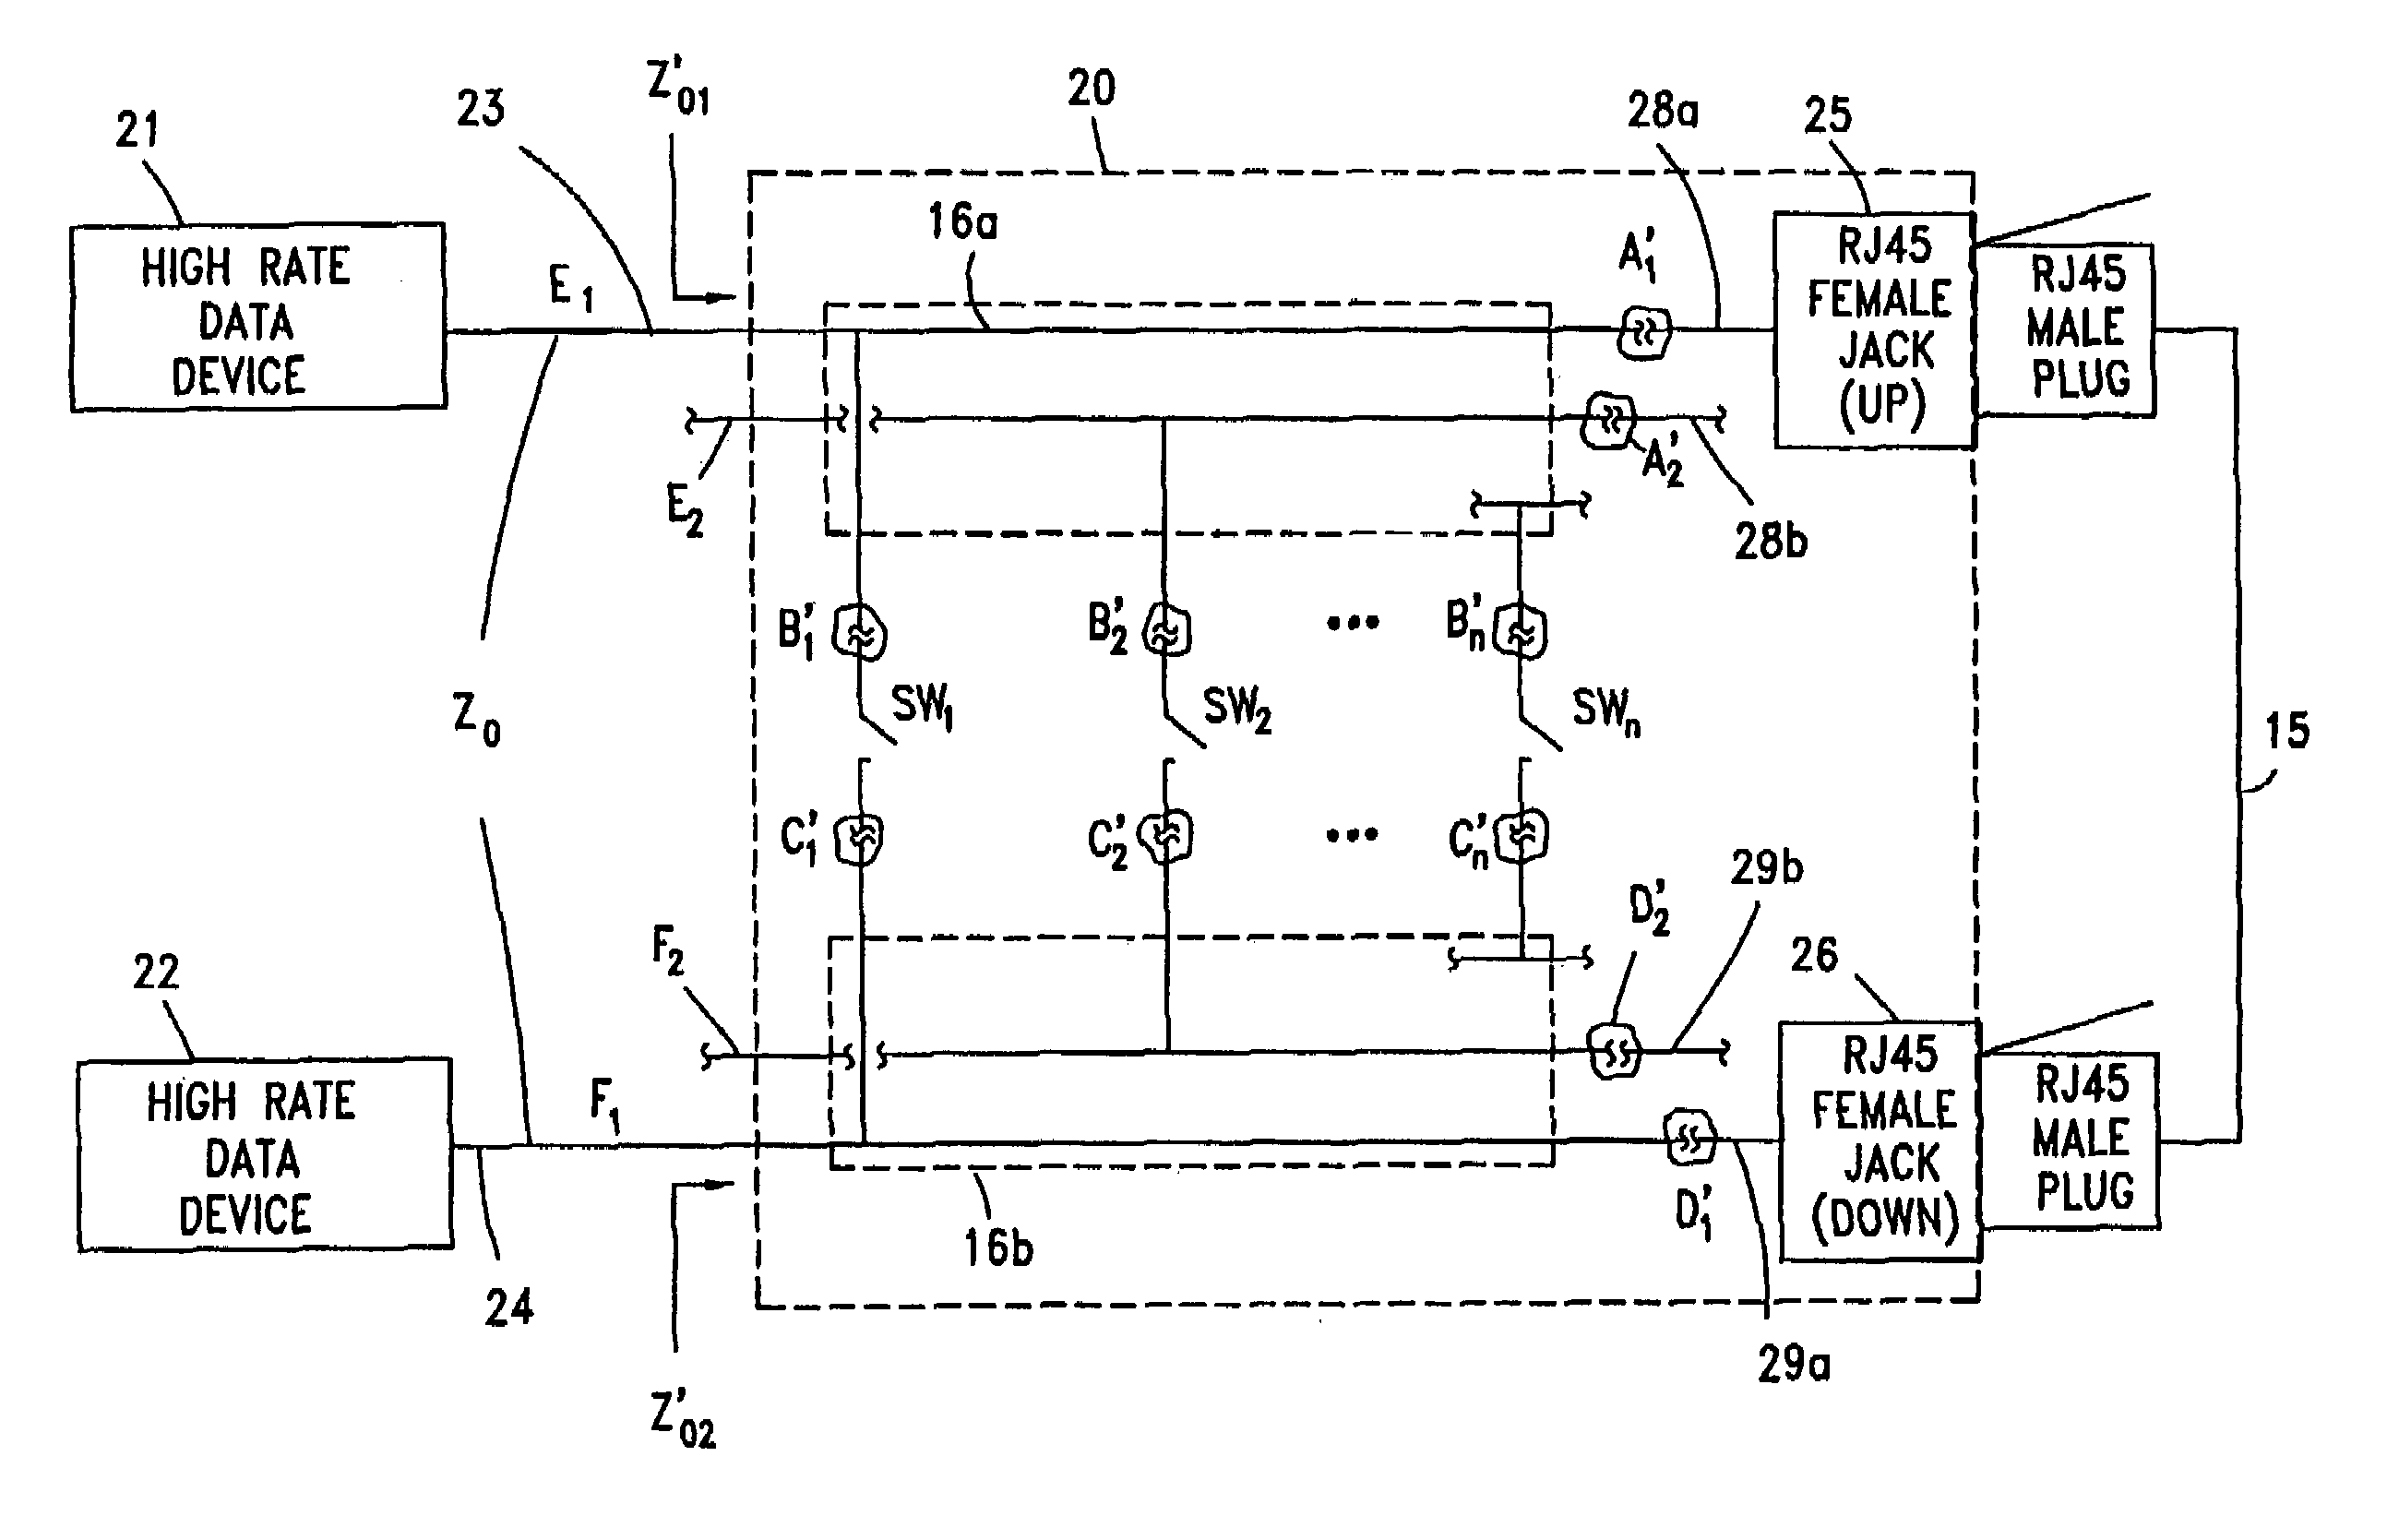 High data rate interconnecting device